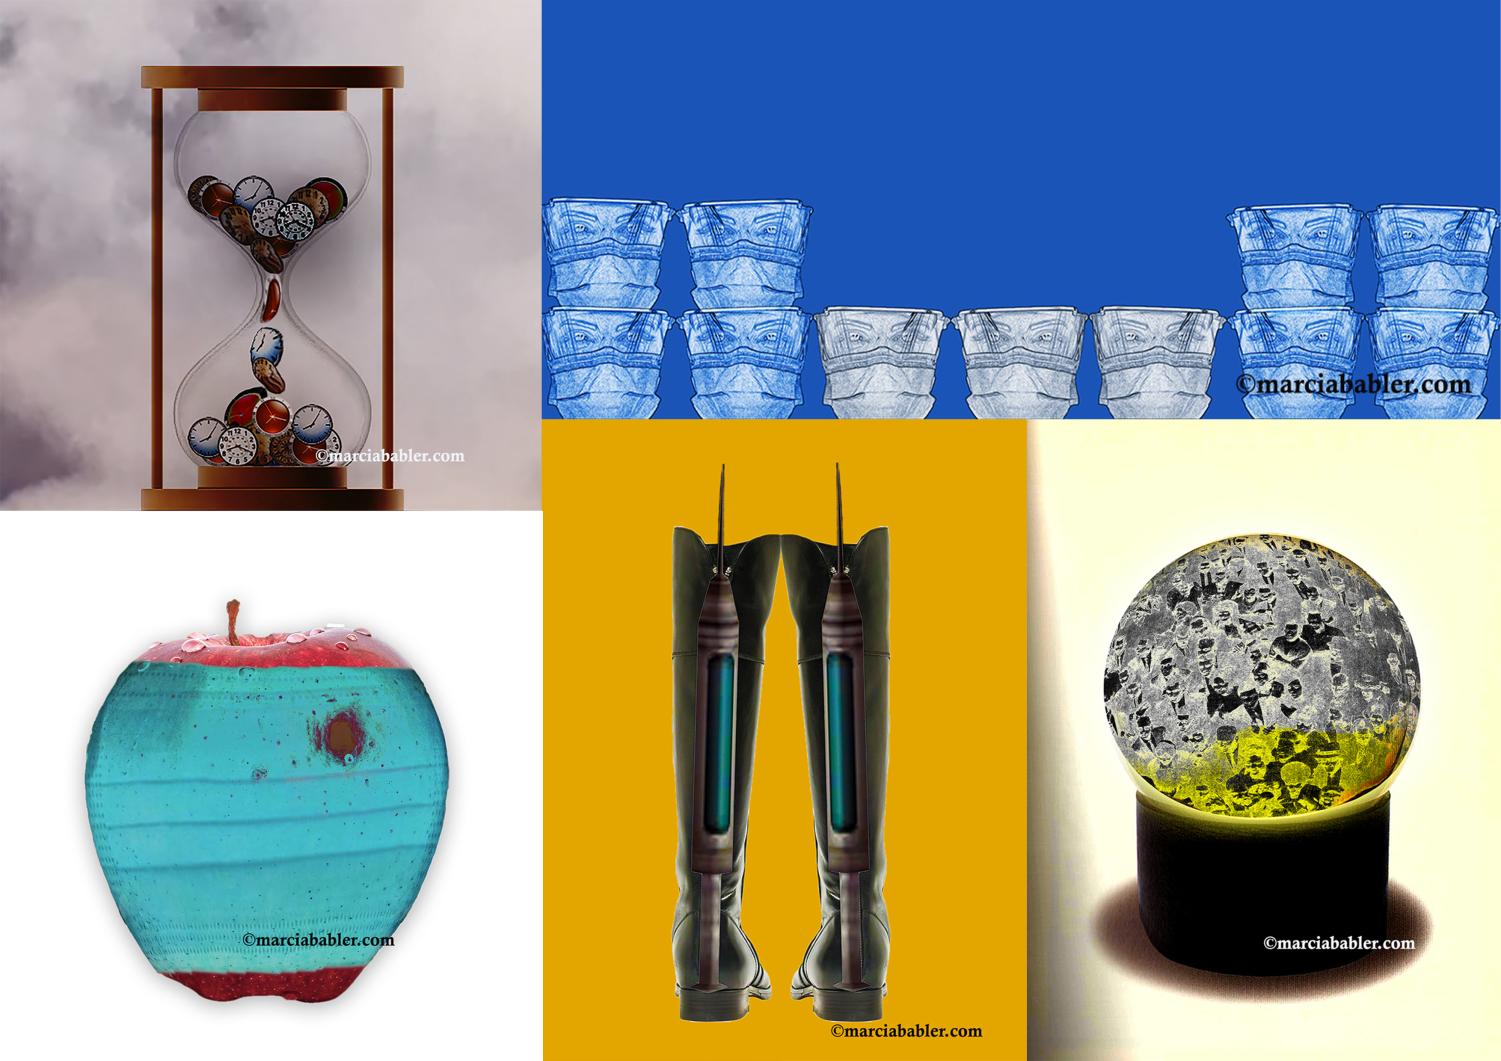 Four+artworks+from+Marcia+Babler%E2%80%99s+virtual+exhibit.+Her+piece+%E2%80%9CIn+Our+Time%E2%80%9D+on+the+top+left+depicts+clocks+moving+through+an+hourglass.+%E2%80%9CBruised%E2%80%9D+on+the+bottom+right+depicts+an+apple+with+a+bloodied+face+mask+over+it.+%E2%80%9CCup+of+Kindness%E2%80%9D+on+the+top+right%2C+depicts+11+cups+with+frontliner+faces+on+them+over+a+blue+background.+%E2%80%9CRe-Boot%E2%80%9D+in+the+bottom+middle+depicts+the+backside+of+a+pair+of+boots+with+a+syringe+protruding+from+the+top.+%E2%80%9CIn+This+Together%E2%80%9D+on+the+bottom+right+depicts+a+crowd+of+people+inside+a+snow+globe.